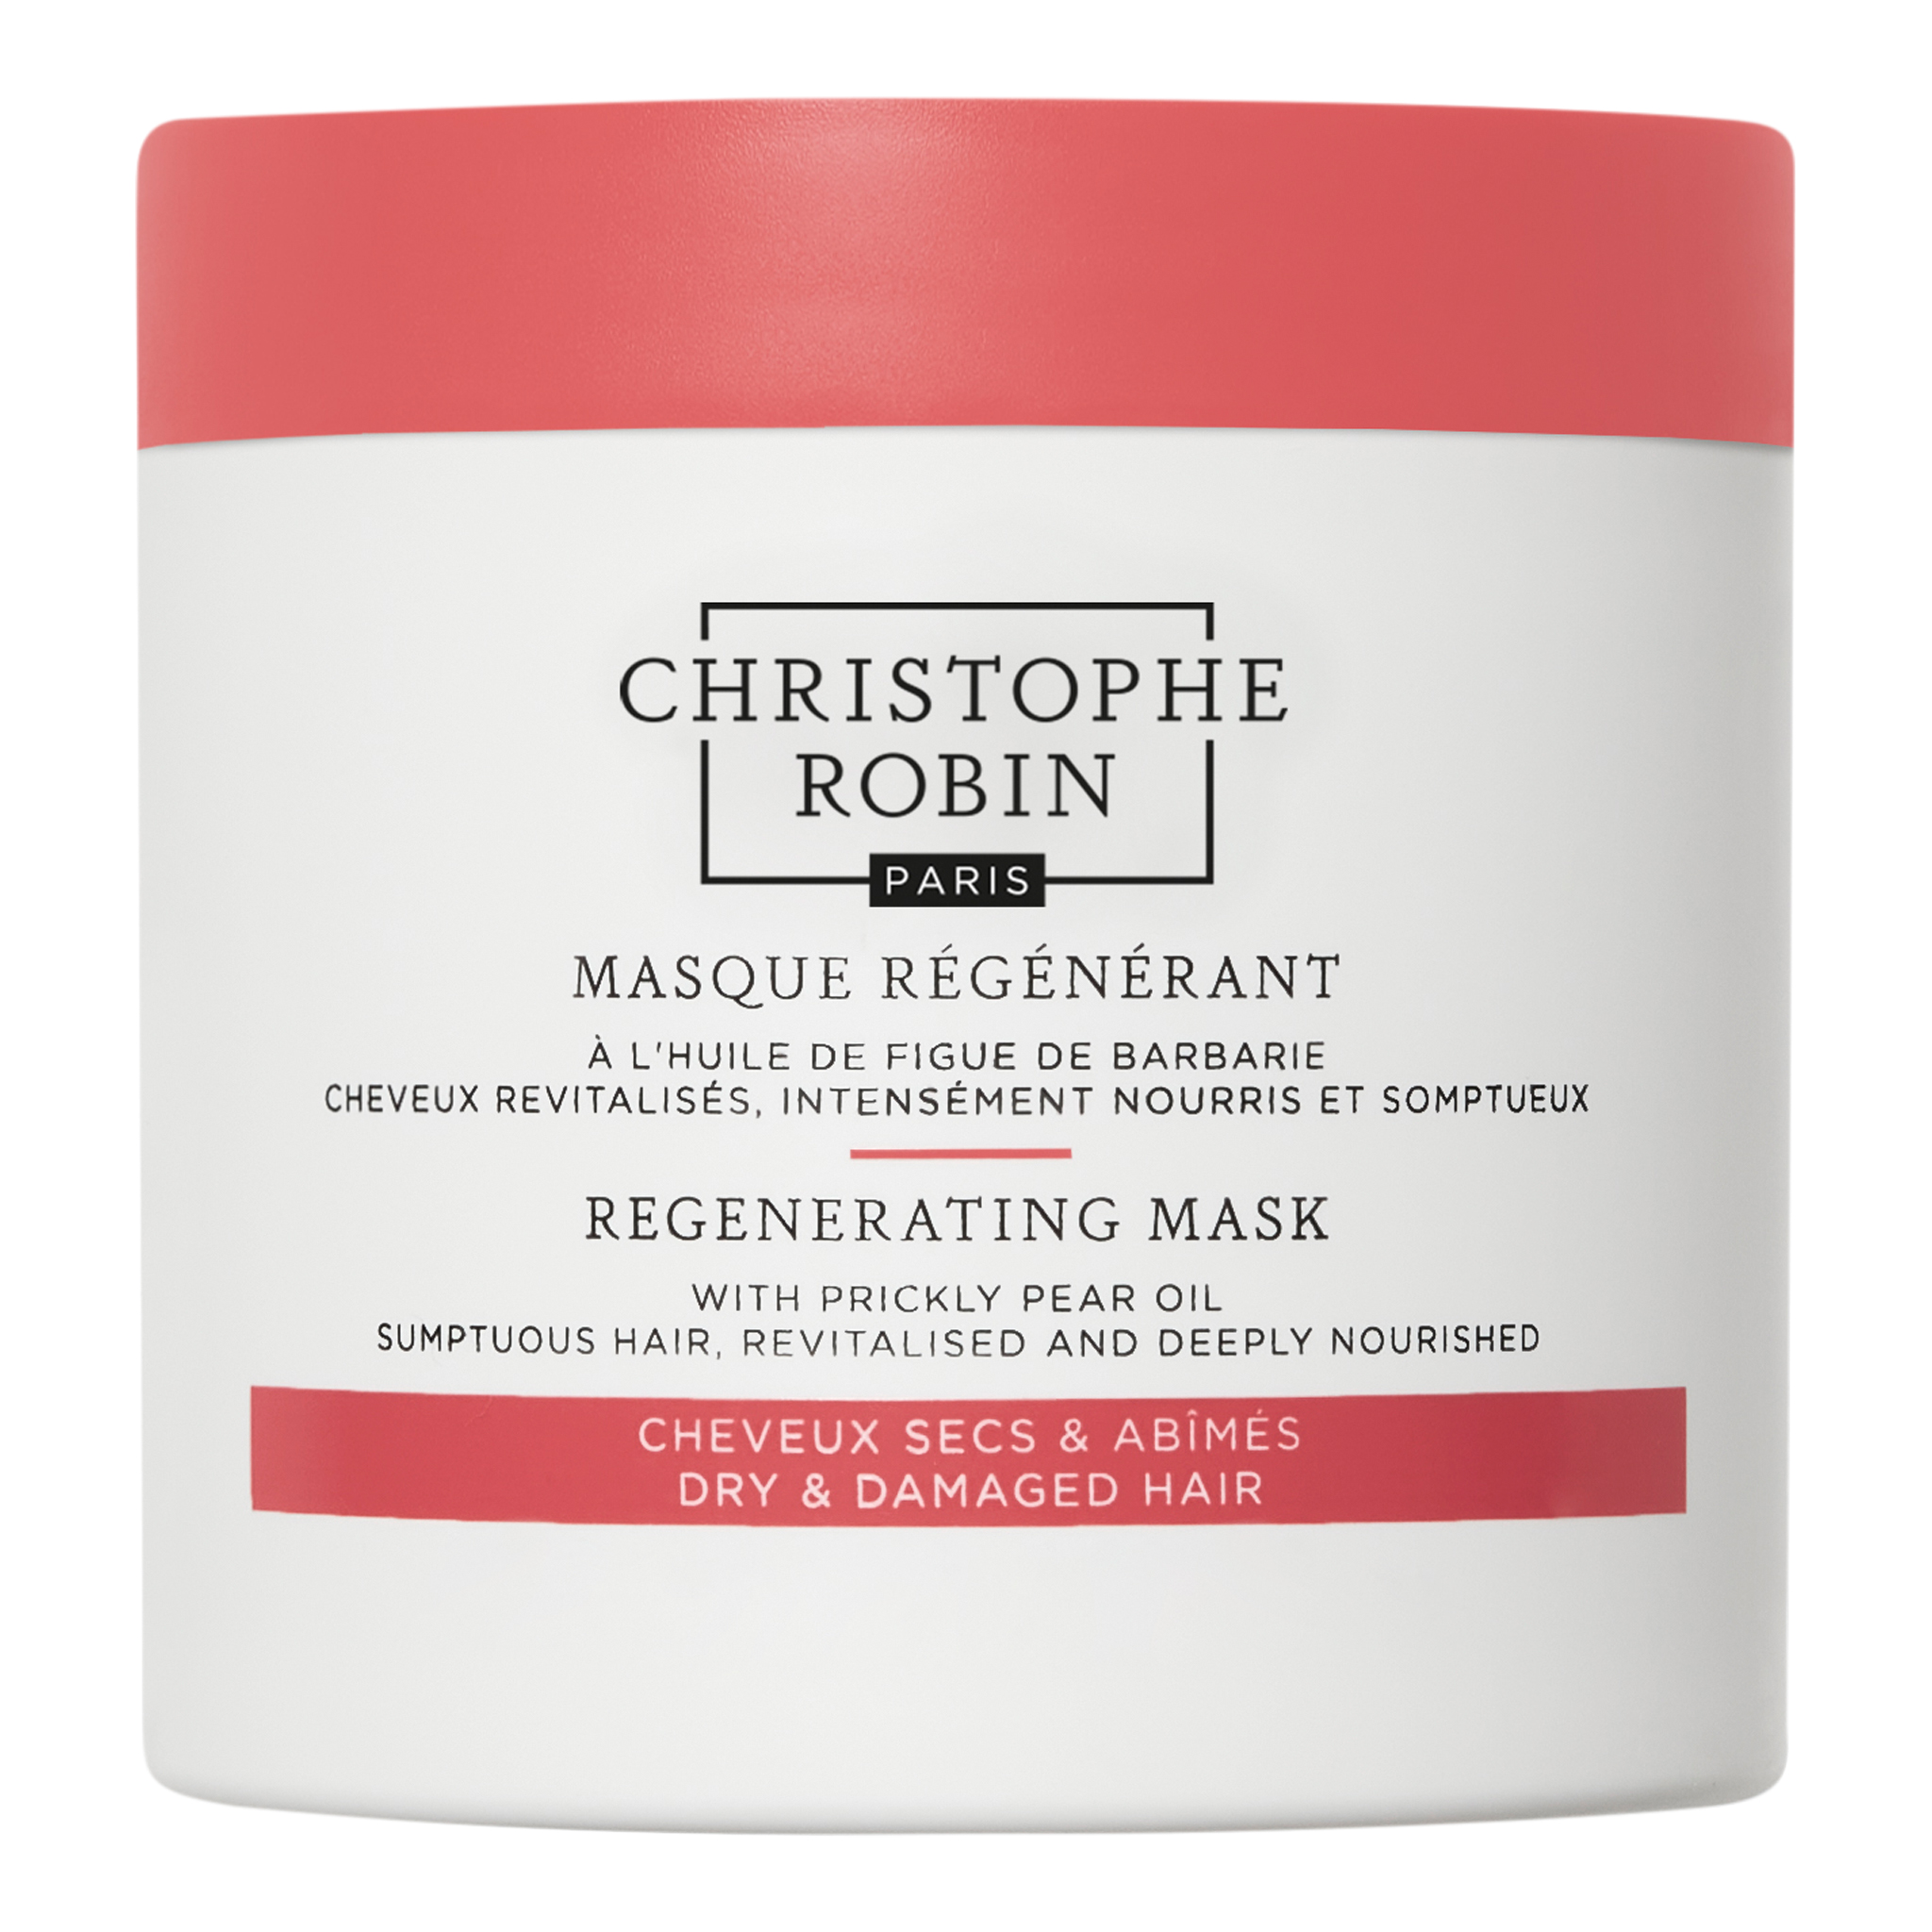 Christophe Robin Regenerating Mask with Prickly Pear Oil - PHASE 1 40ml